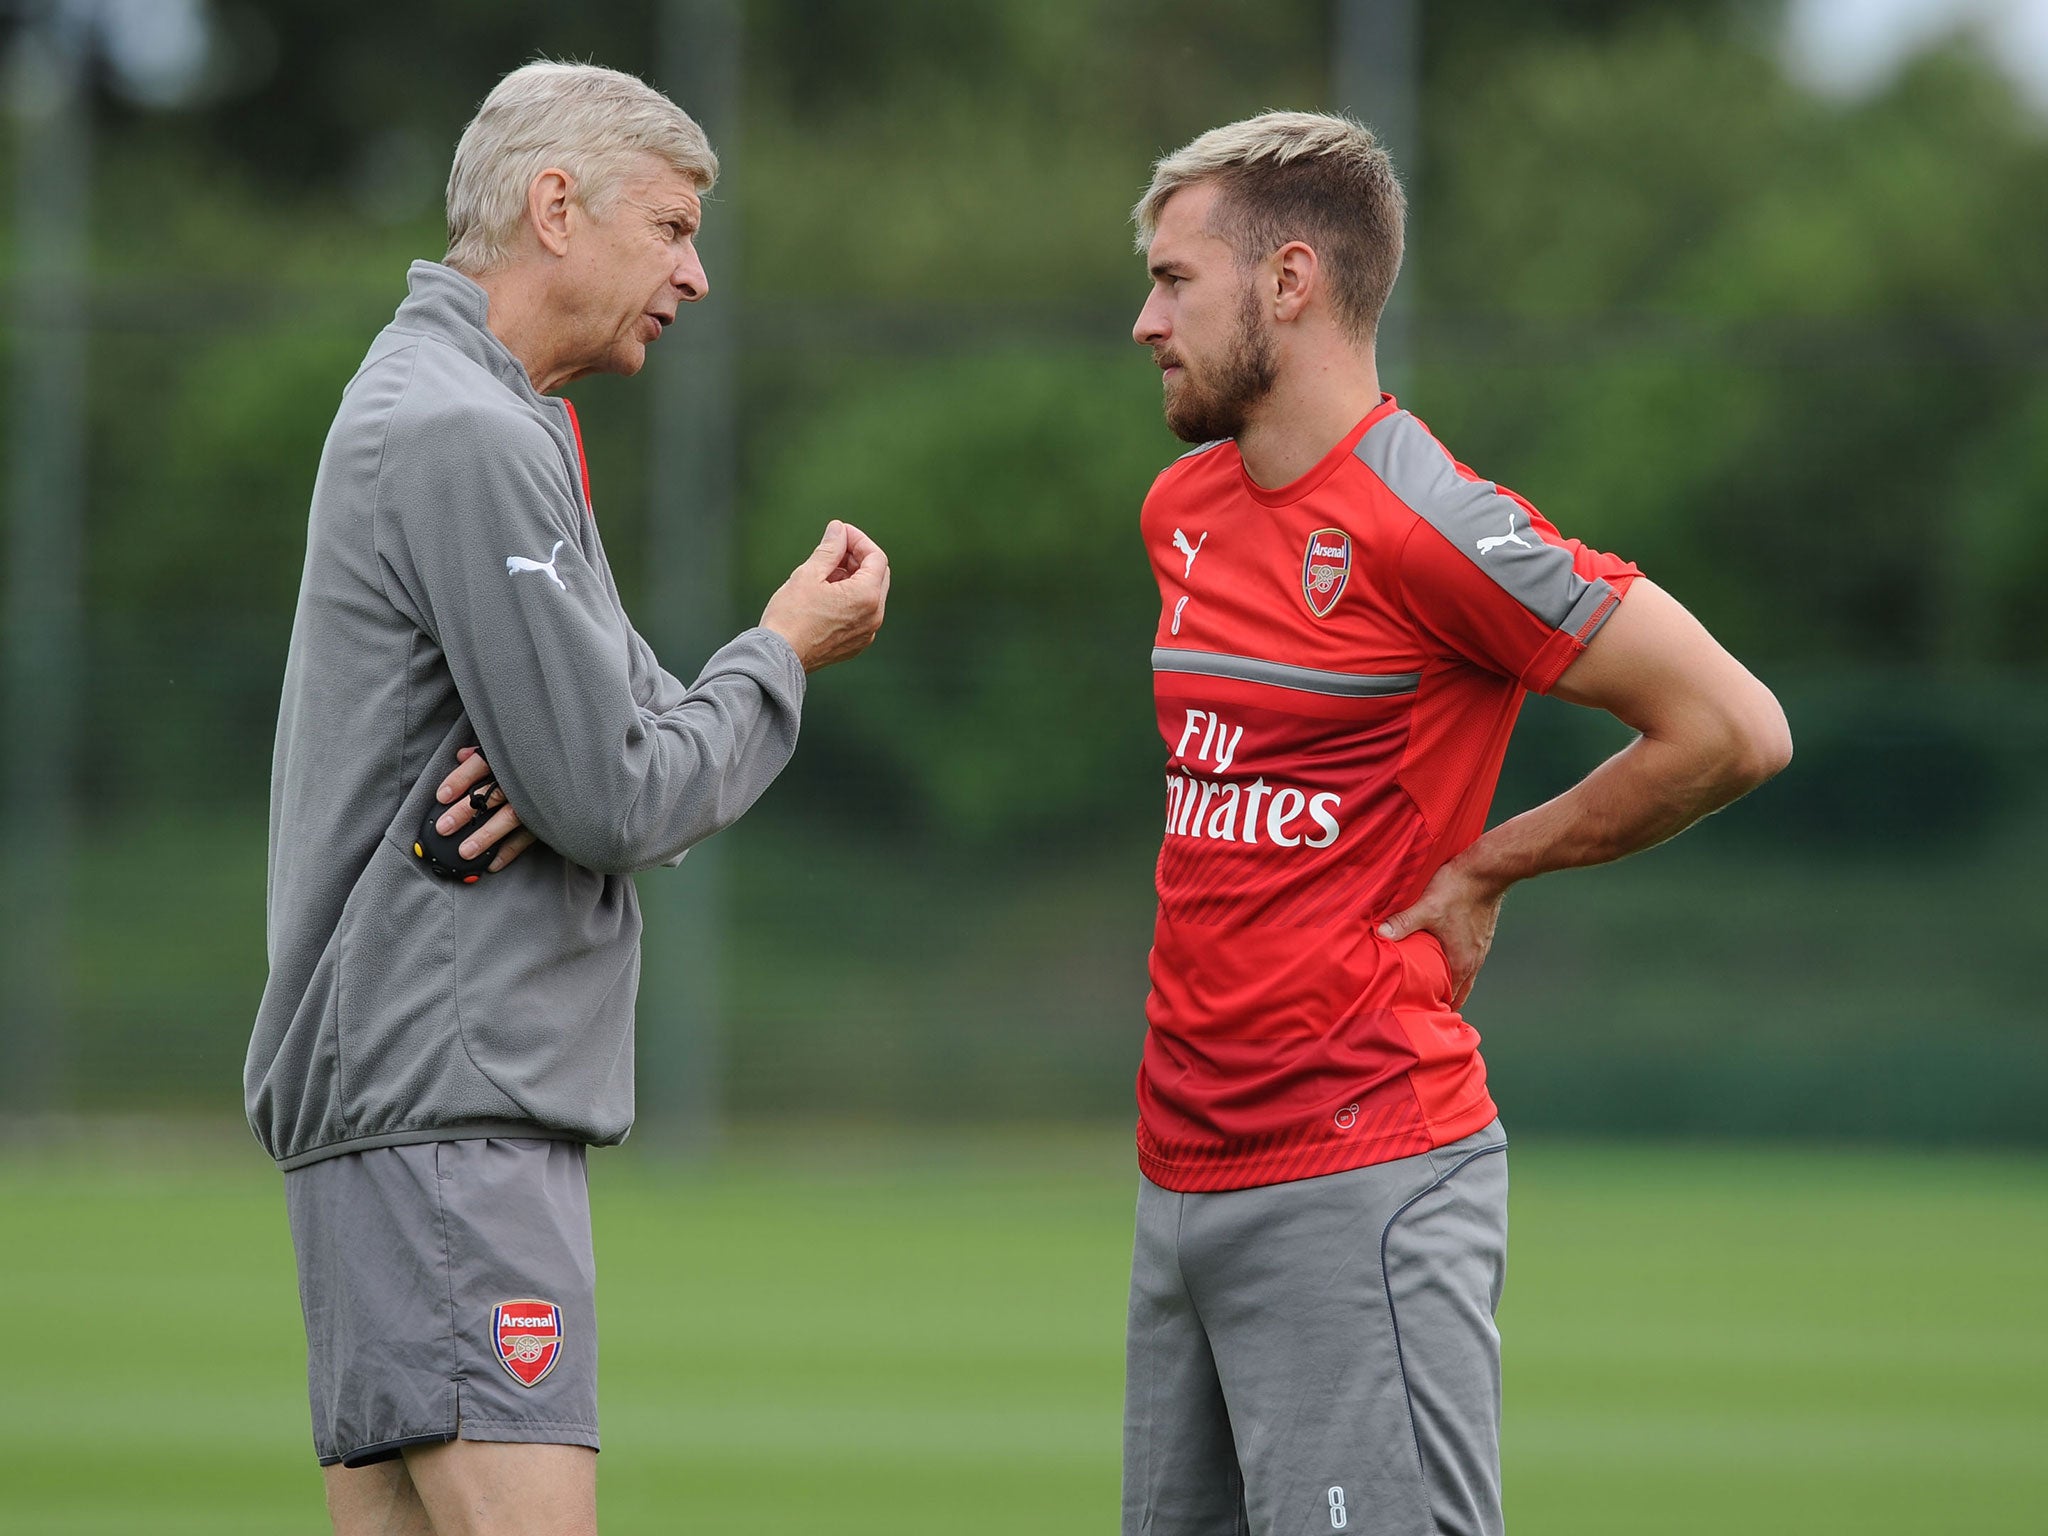 Aaron Ramsey and Arsene Wenger in training together